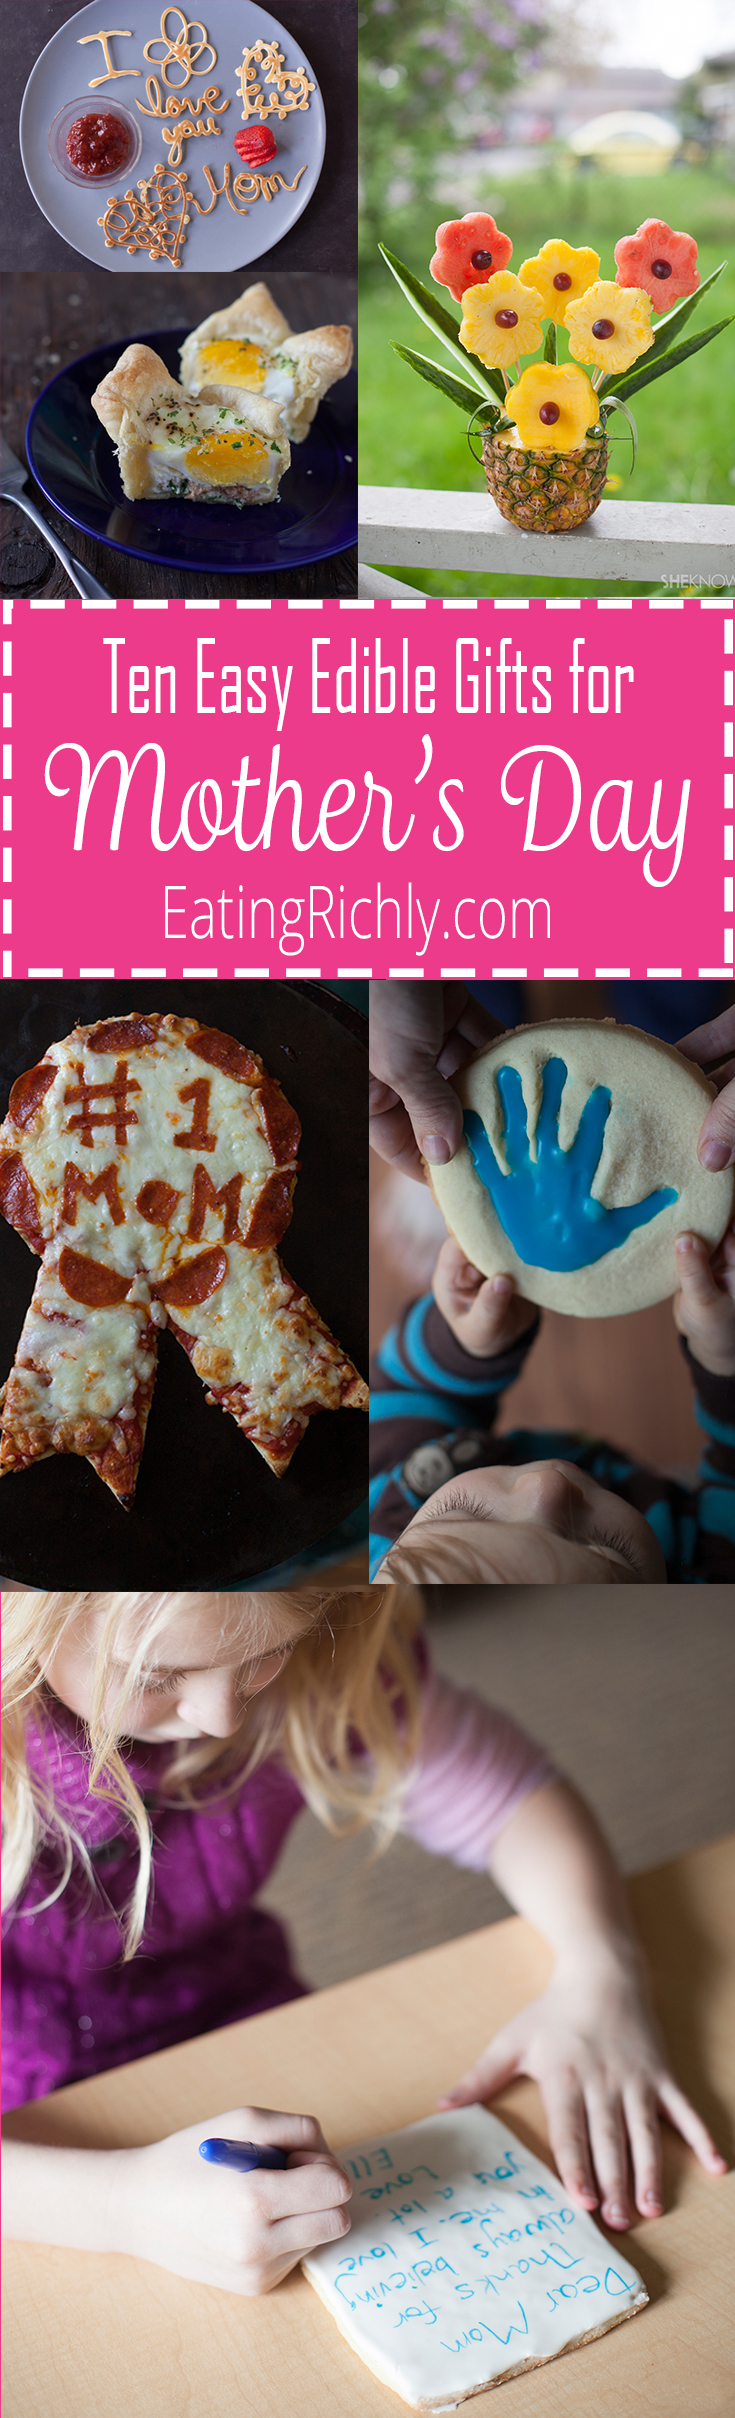 These cute edible Mother's Day gifts are a fun and tasty way for kids to show their love for mom. They can all be made by kids, though younger ones will need some help from an adult. From EatingRichly.com